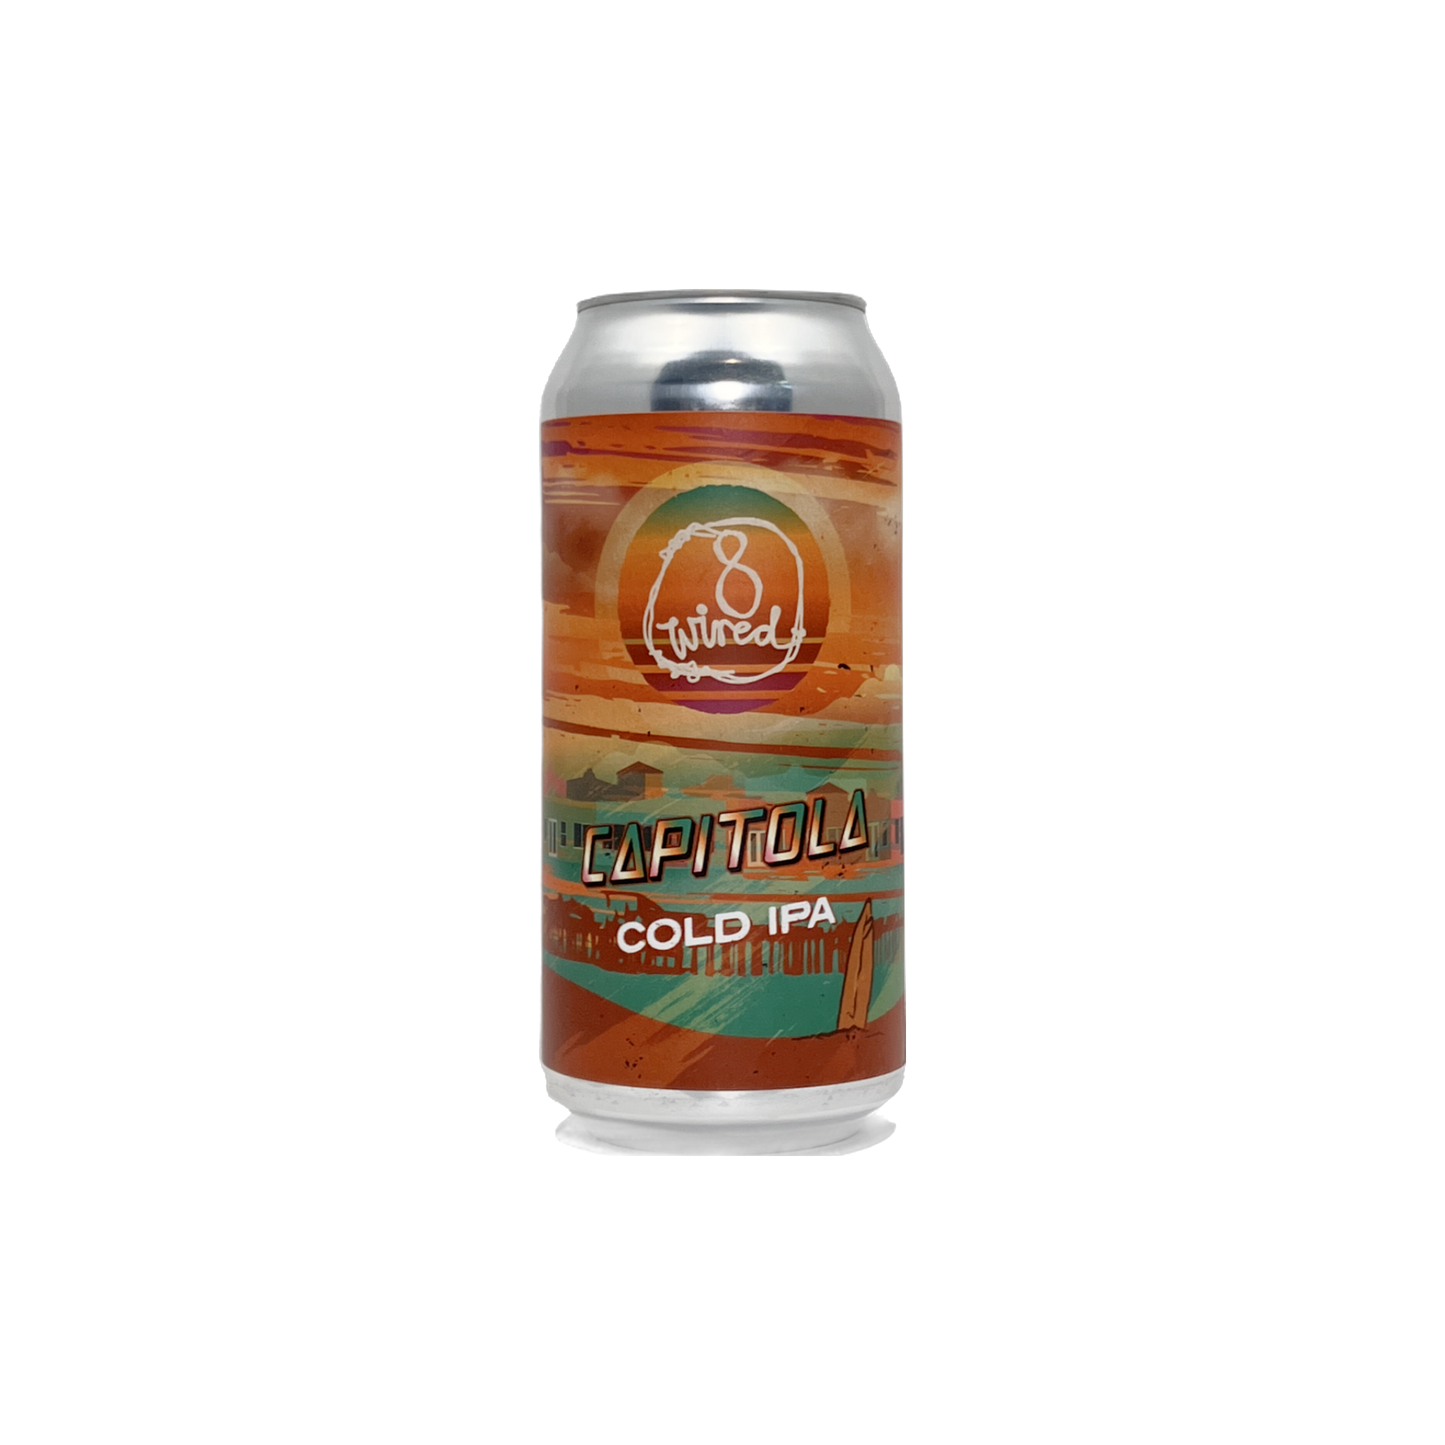 8 Wired Capitola  Cold IPA 440ml